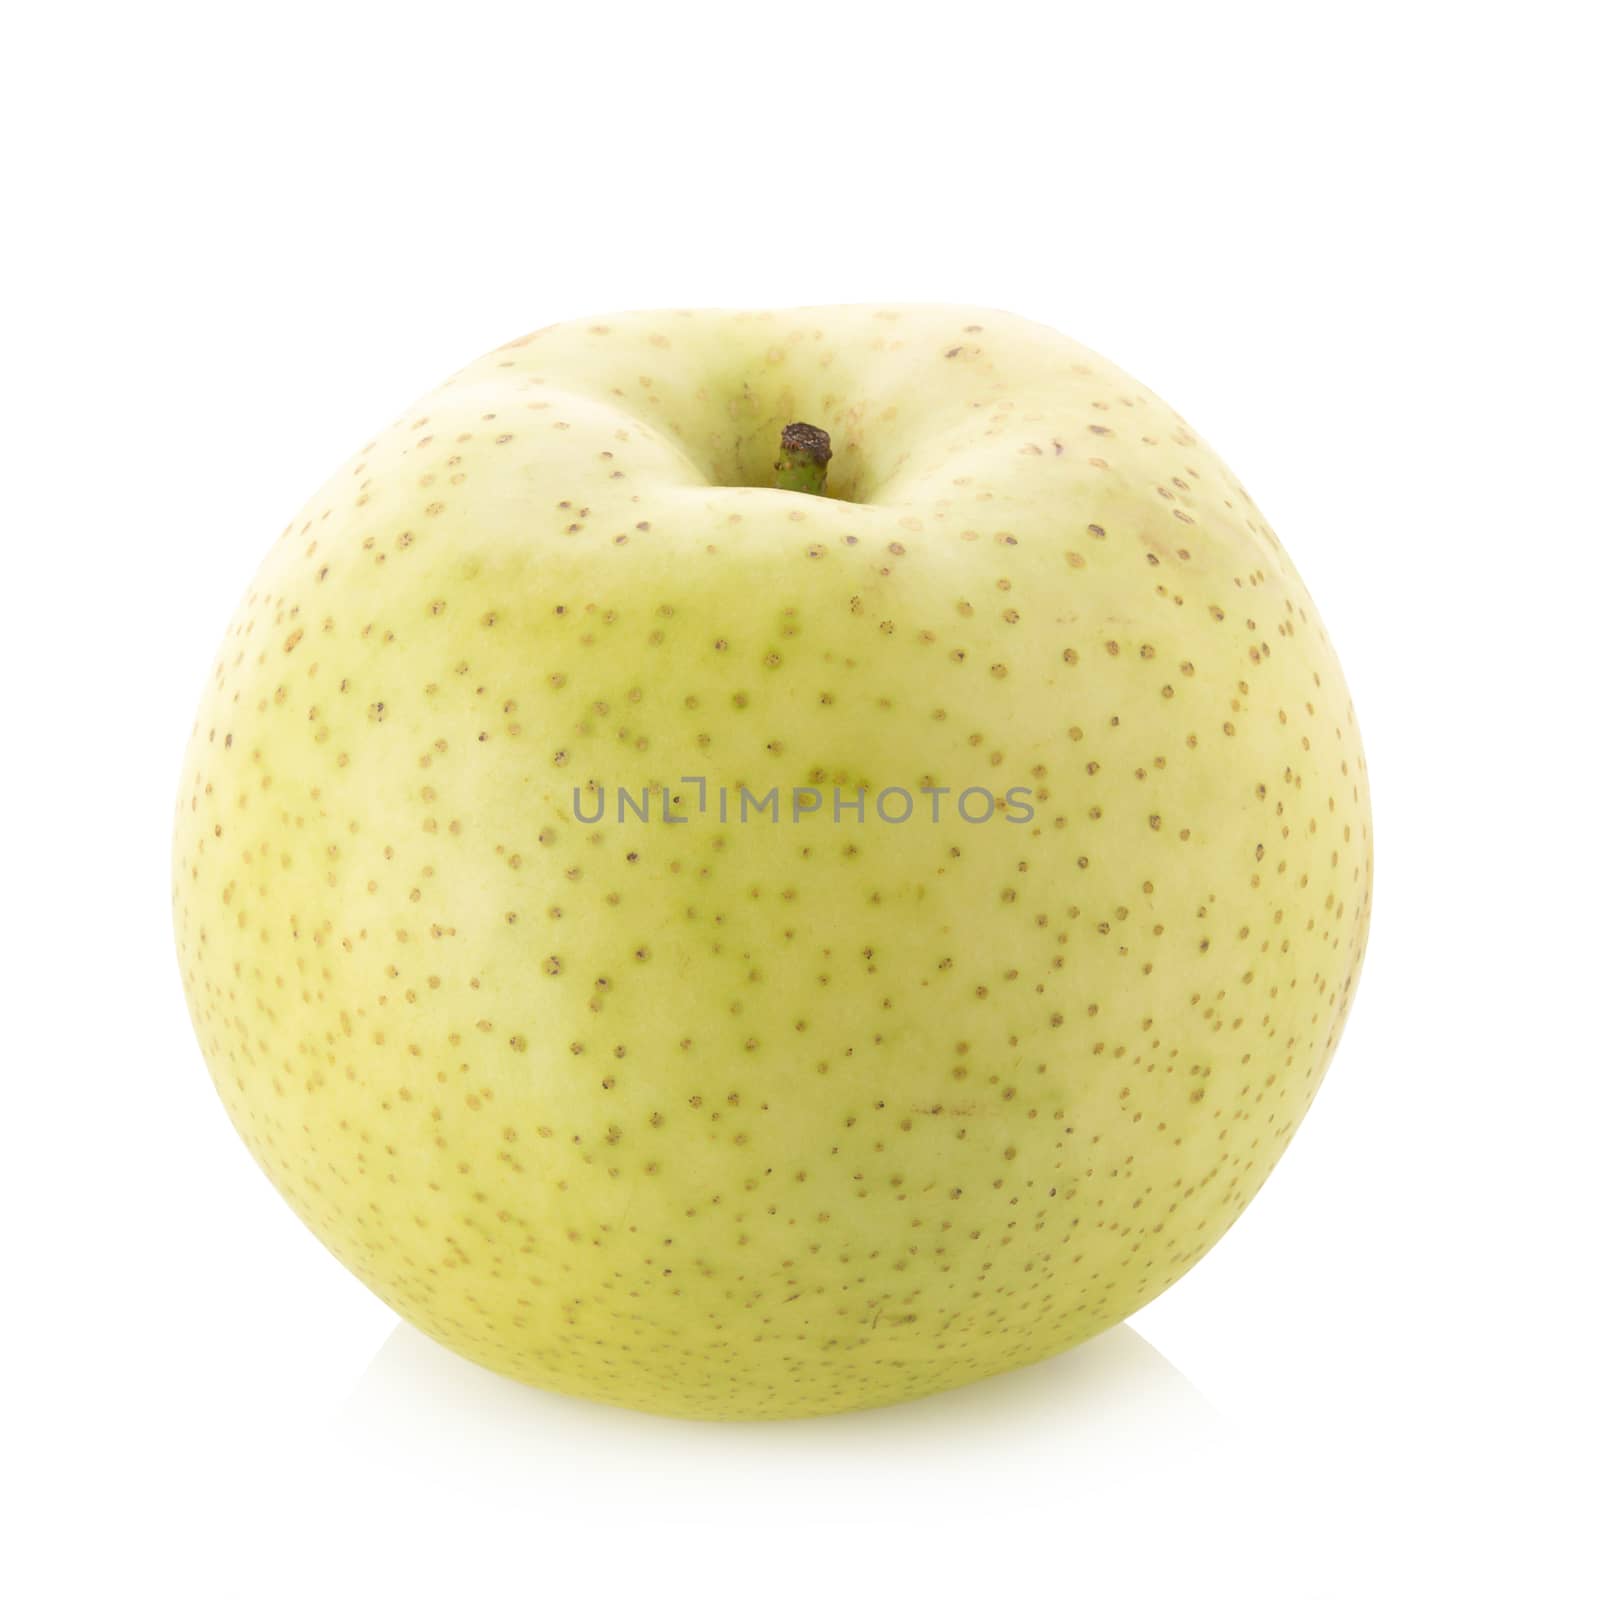 Chinese pear and Sliced isolated on a whate background.